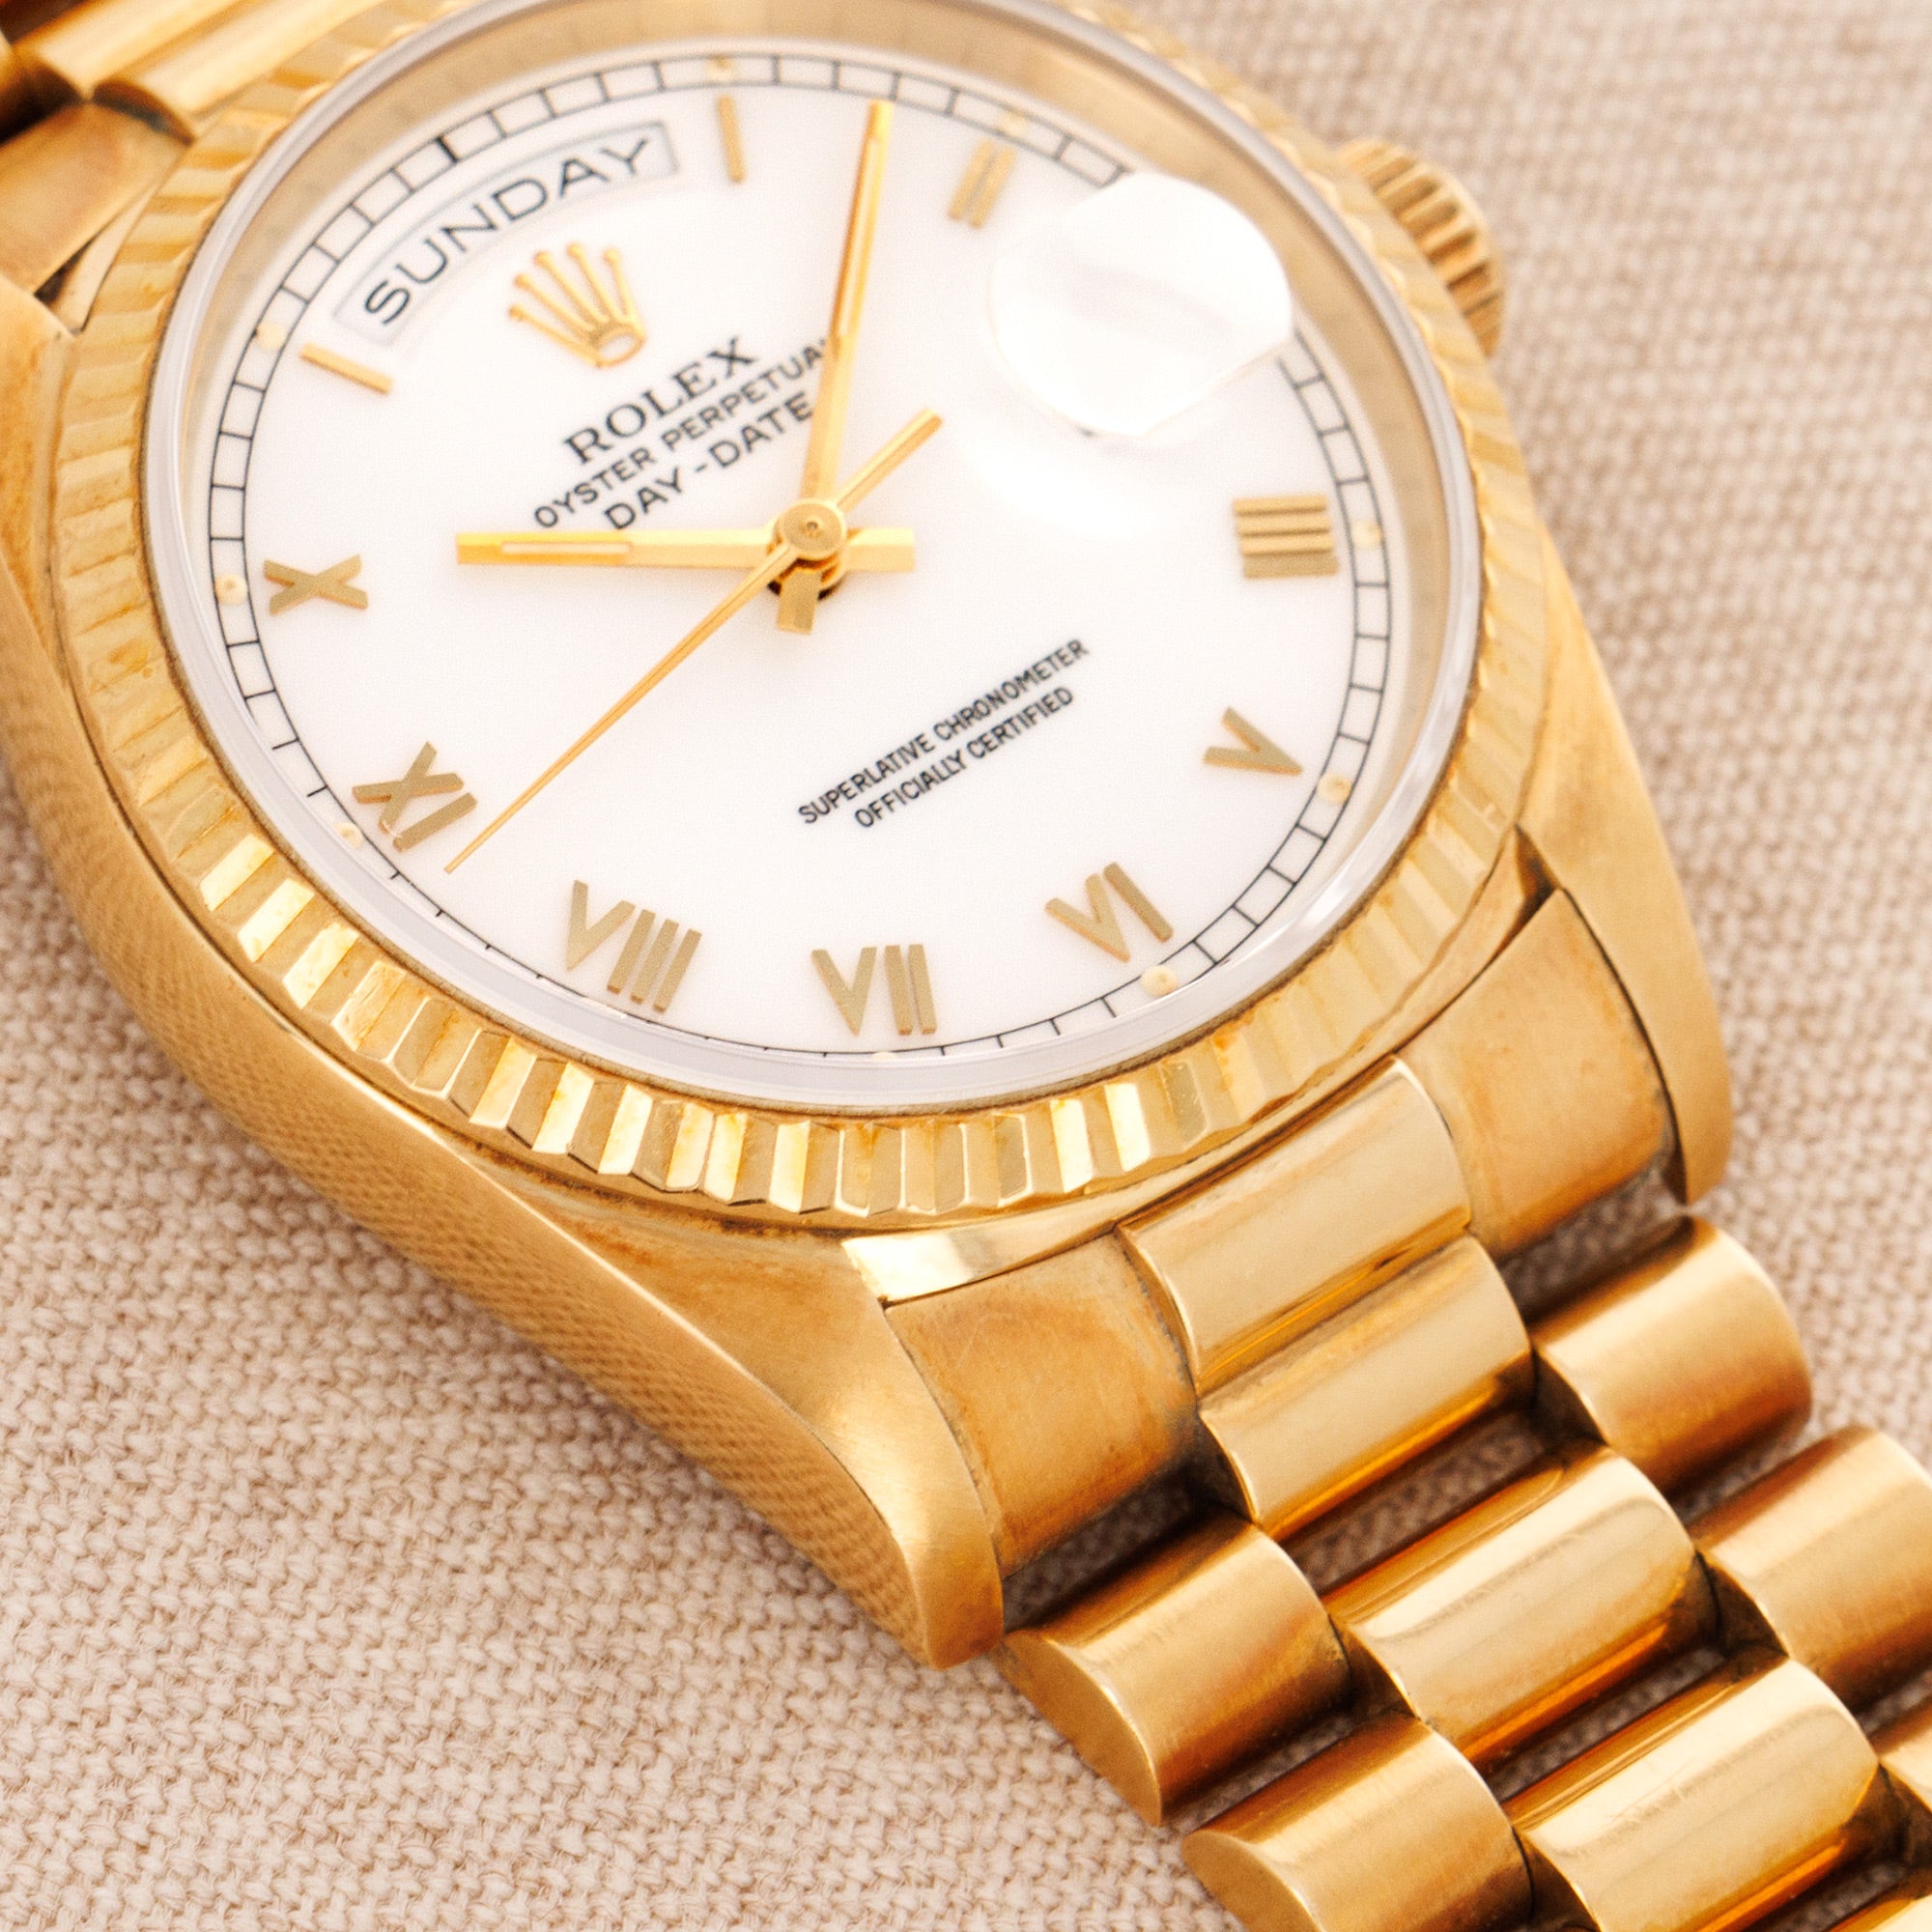 Rolex - Rolex Yellow Gold Day-Date Ref. 18238 with White Roman Dial - The Keystone Watches